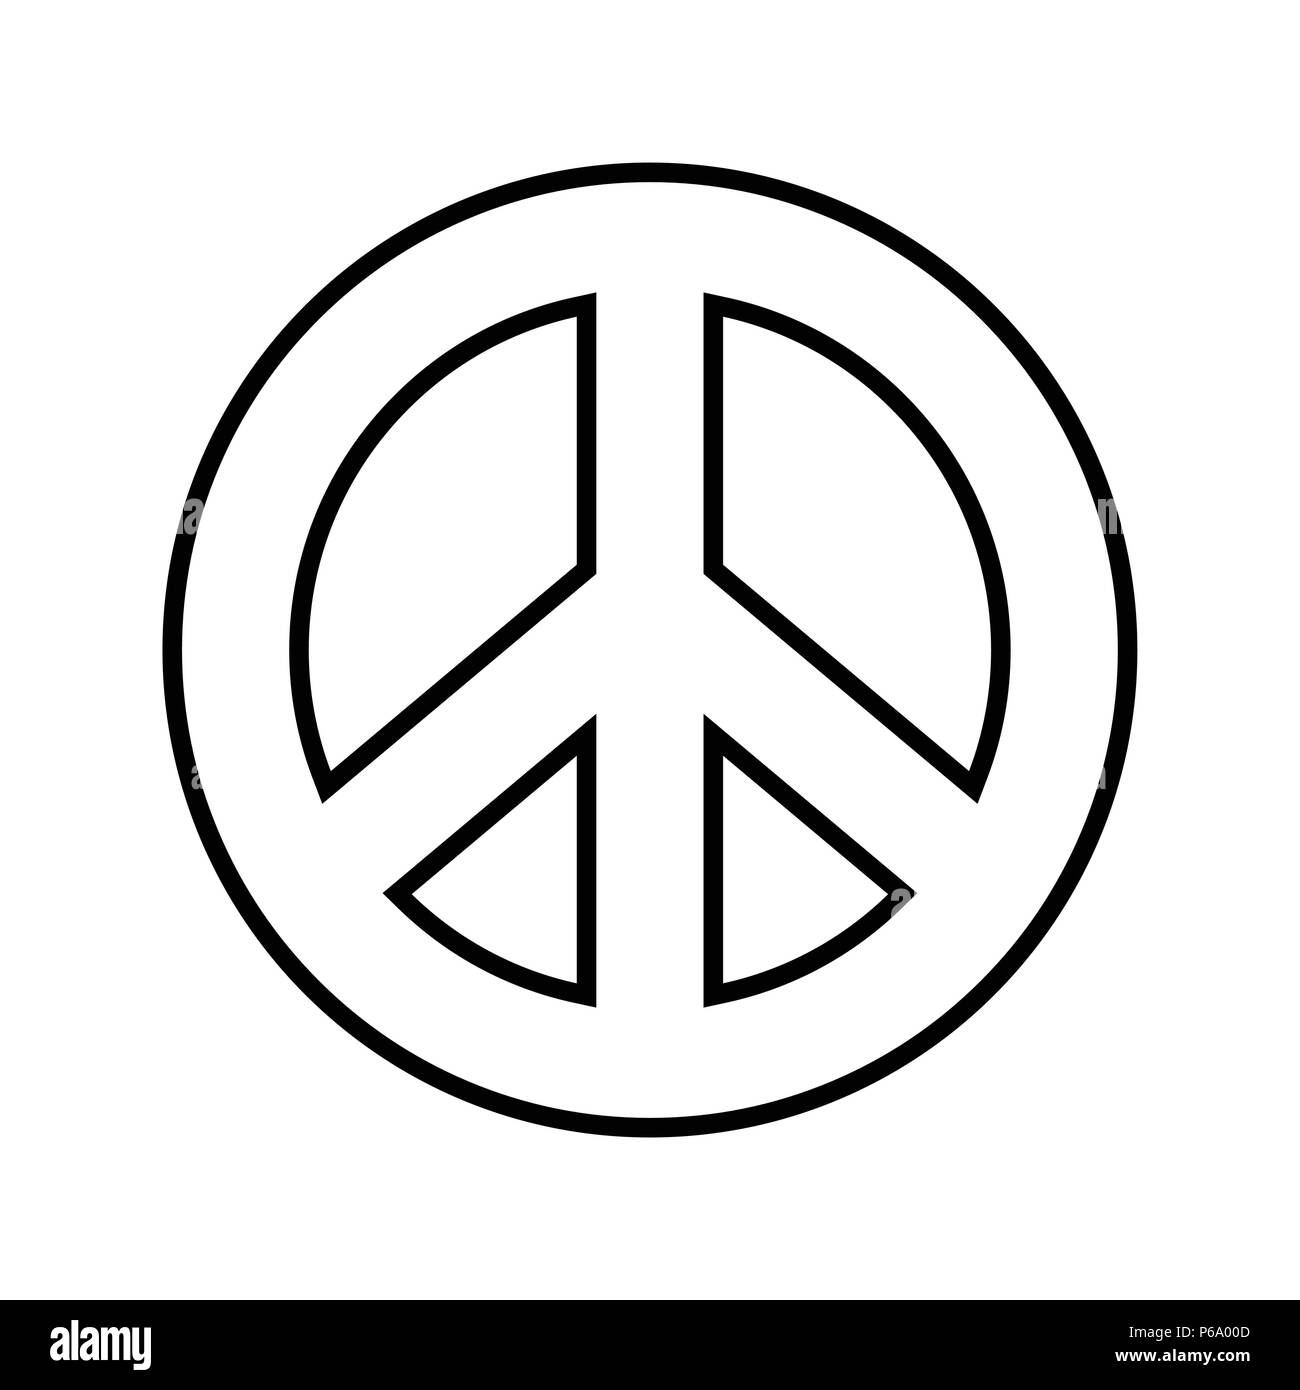 Peace symbol. Outline black and white vector graphic on separated background Stock Vector